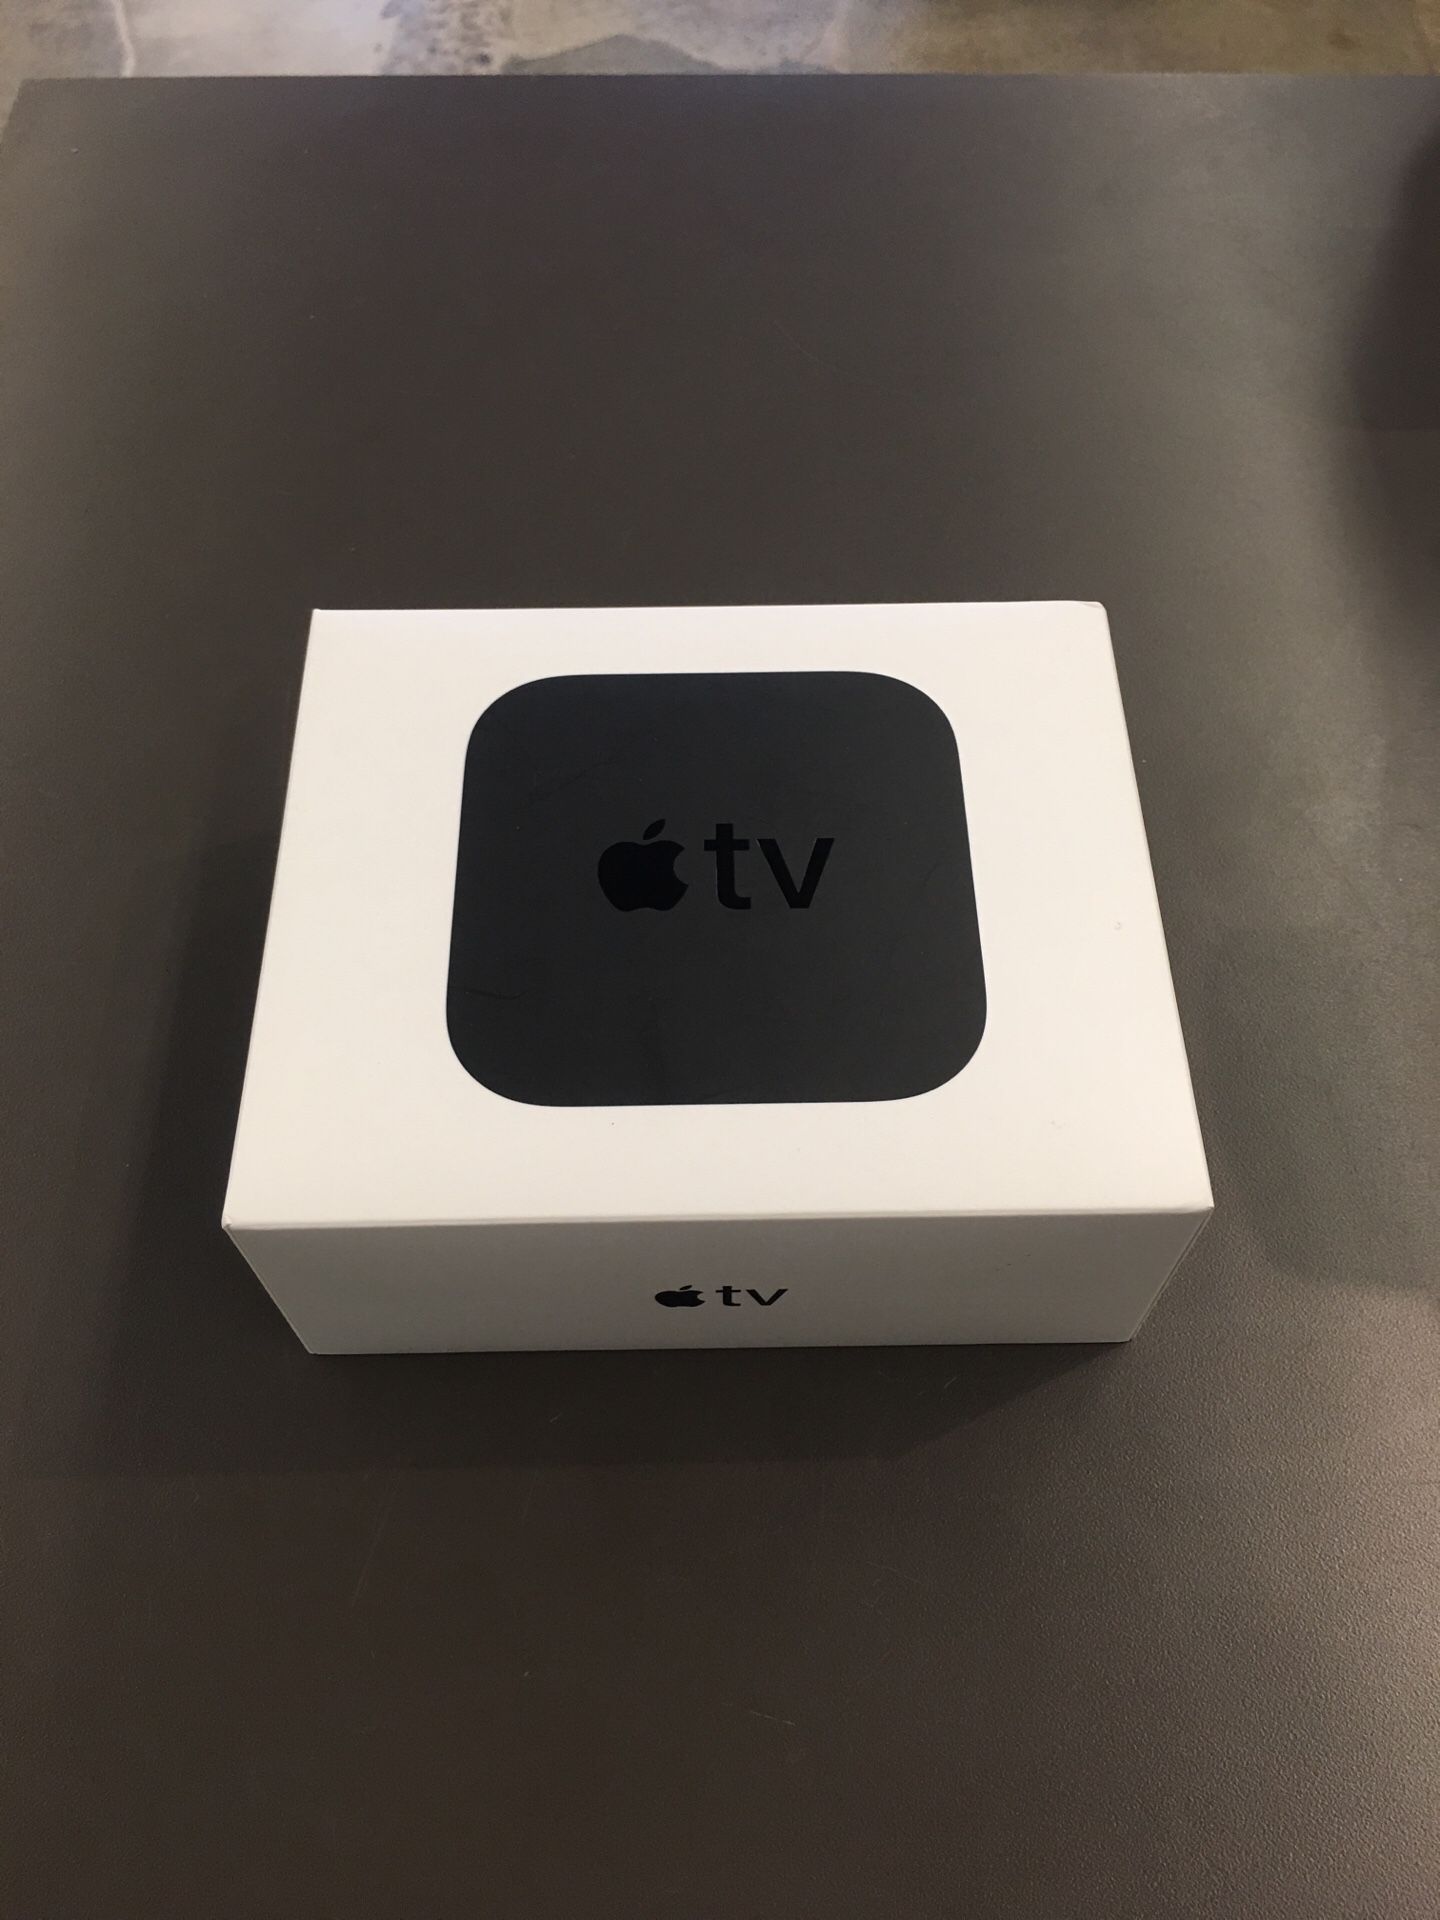 Apple TV 4th Gen. Like new condition